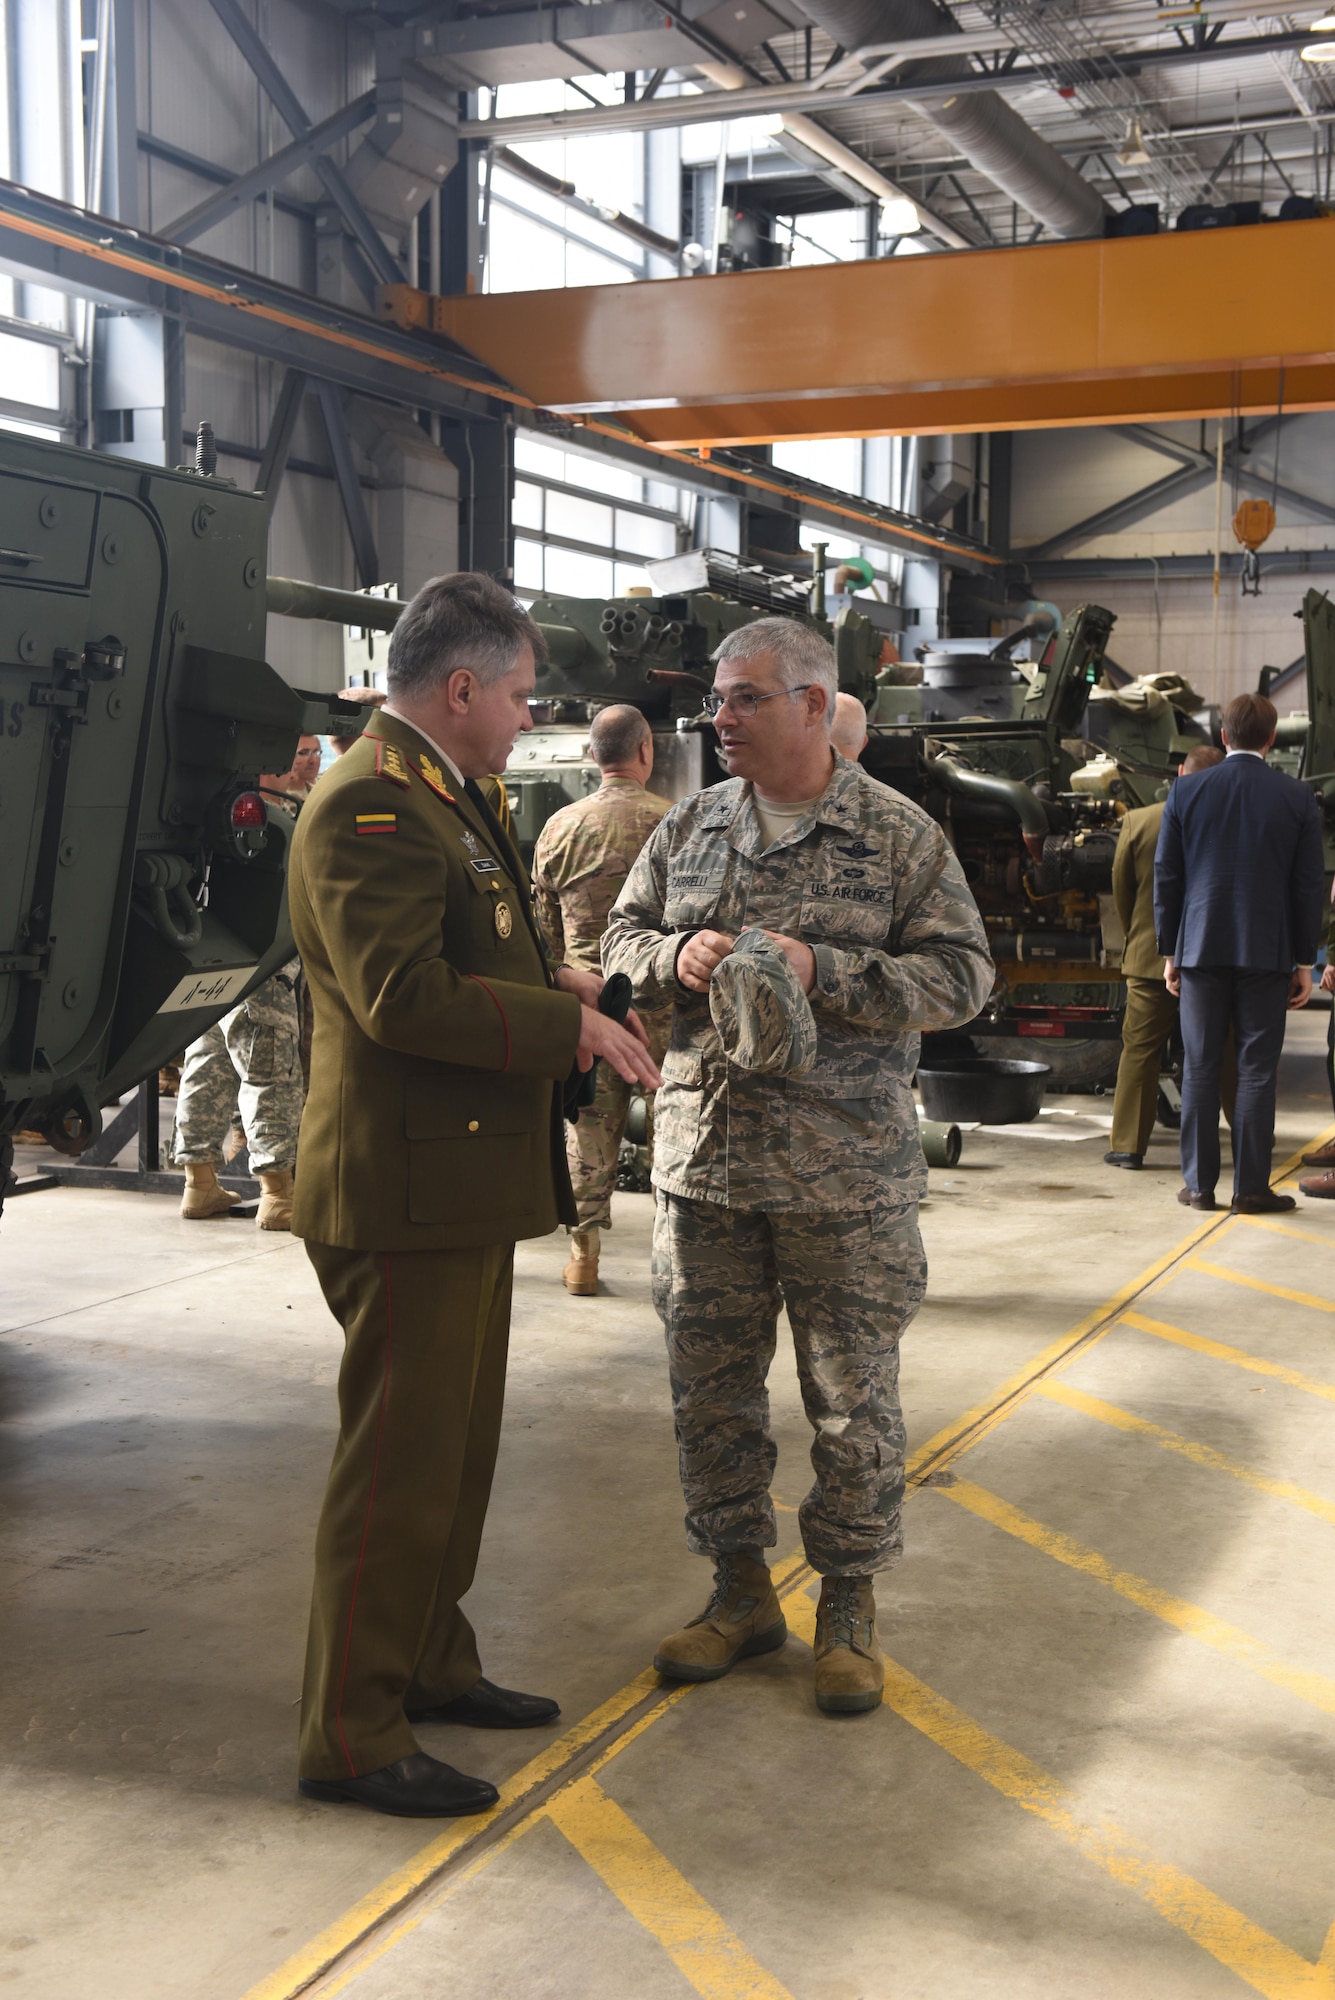 Lt. Gen. Jonas Vytautas Zukas (left), chief of defense of Lithuania, and Brig. Gen. Tony Carrelli, adjutant general, Pennsylvania National Guard, discuss the PANG’s Stryker vehicle Oct. 15 during a tour of the Eastern Army National Guard Aviation Training Site at Fort Indiantown Gap, Annville, Pa. The PANG and Lithuanian officials spent the day fostering a state-country partnership that began in 1993. (U.S. Air National Guard photo by Tech. Sgt. Claire Behney/Released)